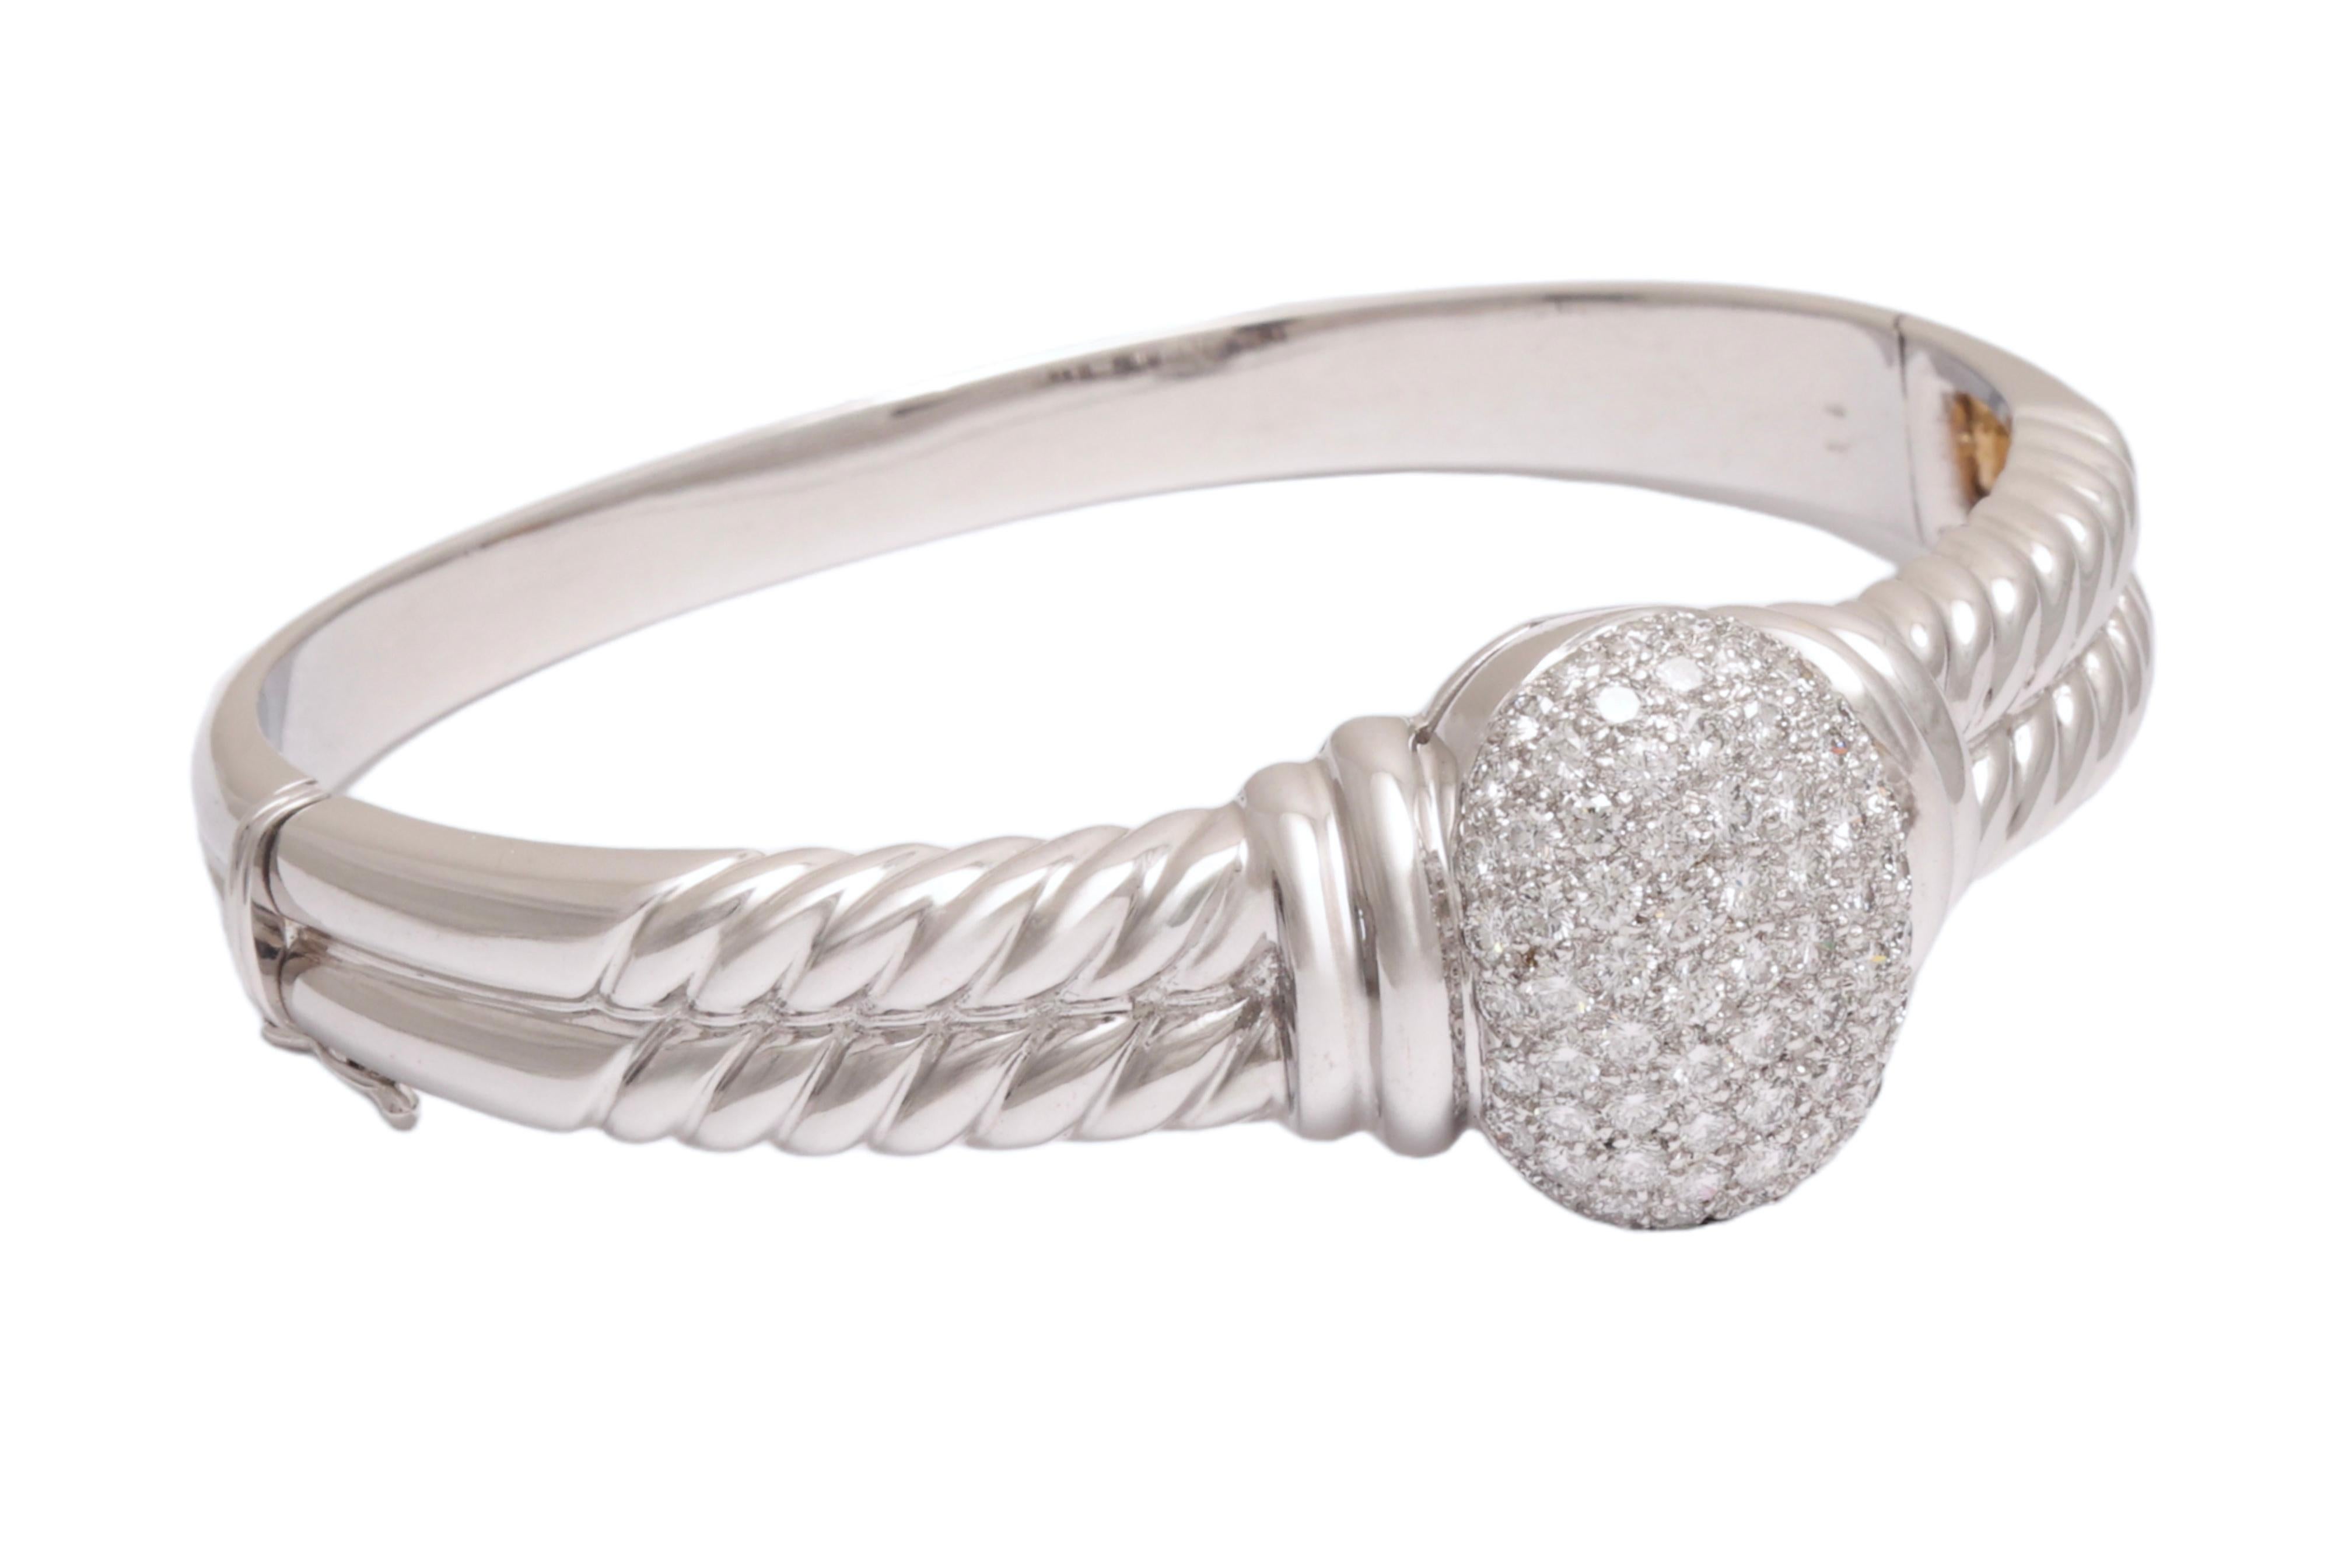 Stunning 18kt White Gold Bangle Bracelet With diamonds. 

Possibility to purchase a matching ring to the bracelet

Diamond: 80 brilliant cut diamonds : 3,2 ct

Material: 18kt solid gold

Measurements: length 64.2 x height 61.7 x width 18.9 mm, Will 